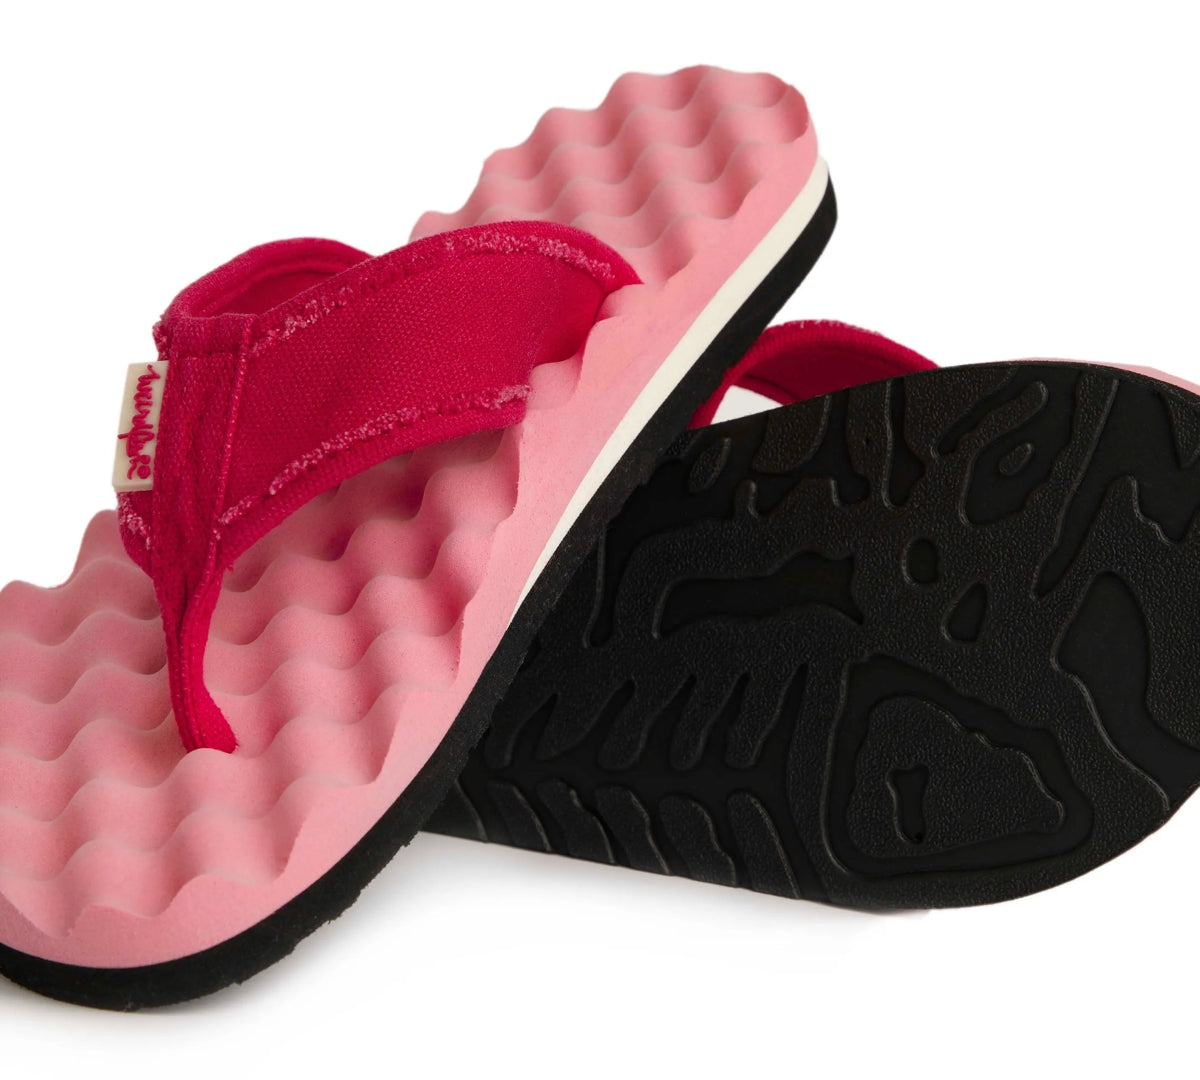 Women's Cayman flip flops from Weird Fish in Hot Pink with a bumpy waffle shaped footbed.